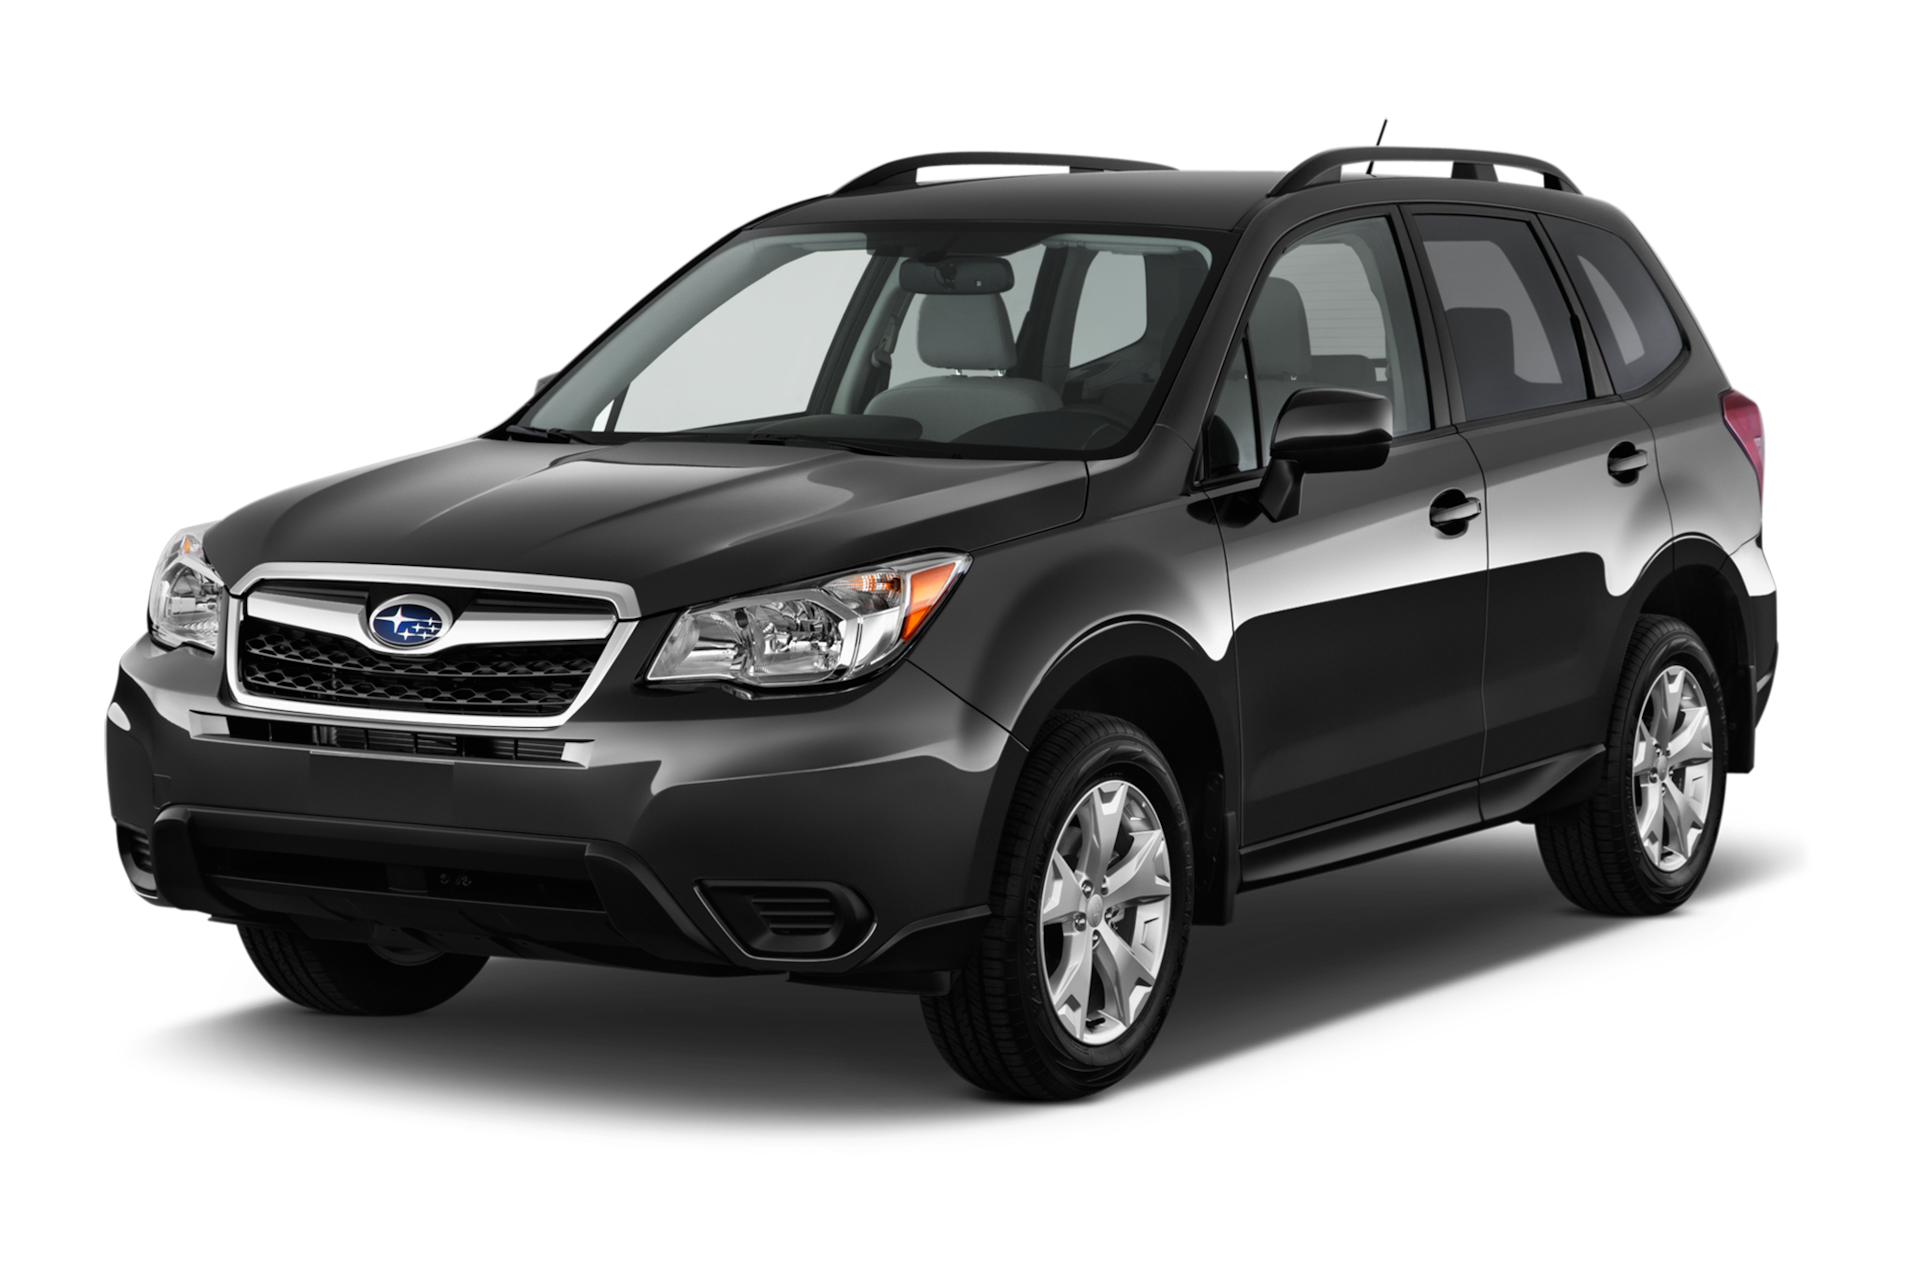 2014 Subaru Forester Prices, Reviews, and Photos - MotorTrend